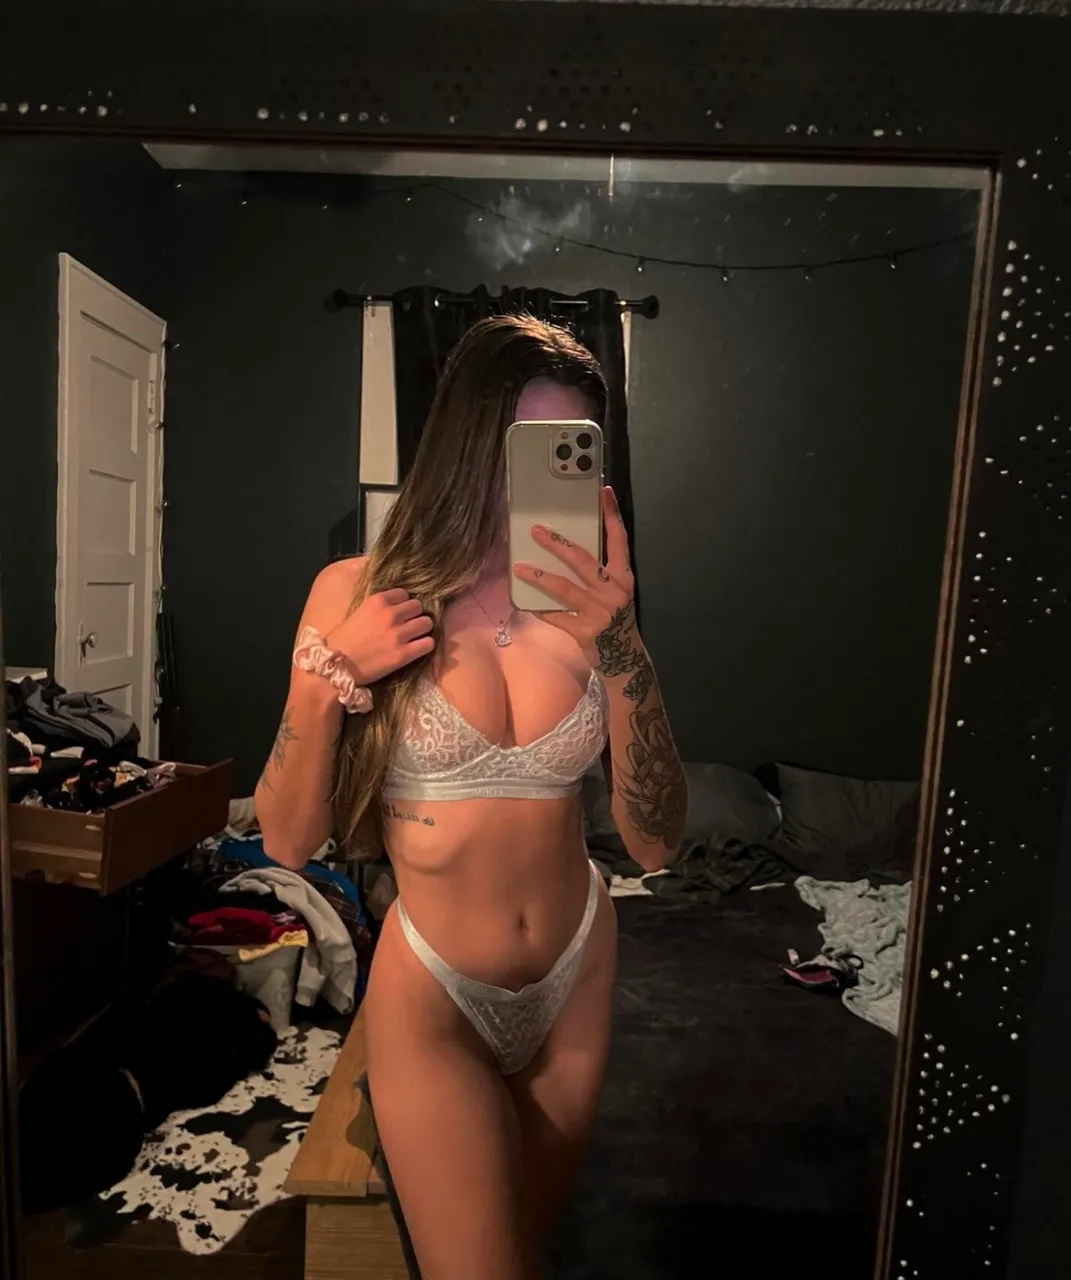 Escorts Long Beach, California iM NEW JUICY, HOT🔥CREAMY 💦SEXY AND AVAILABLE TO SATISFY 🍆YOU COMPLETELY👅